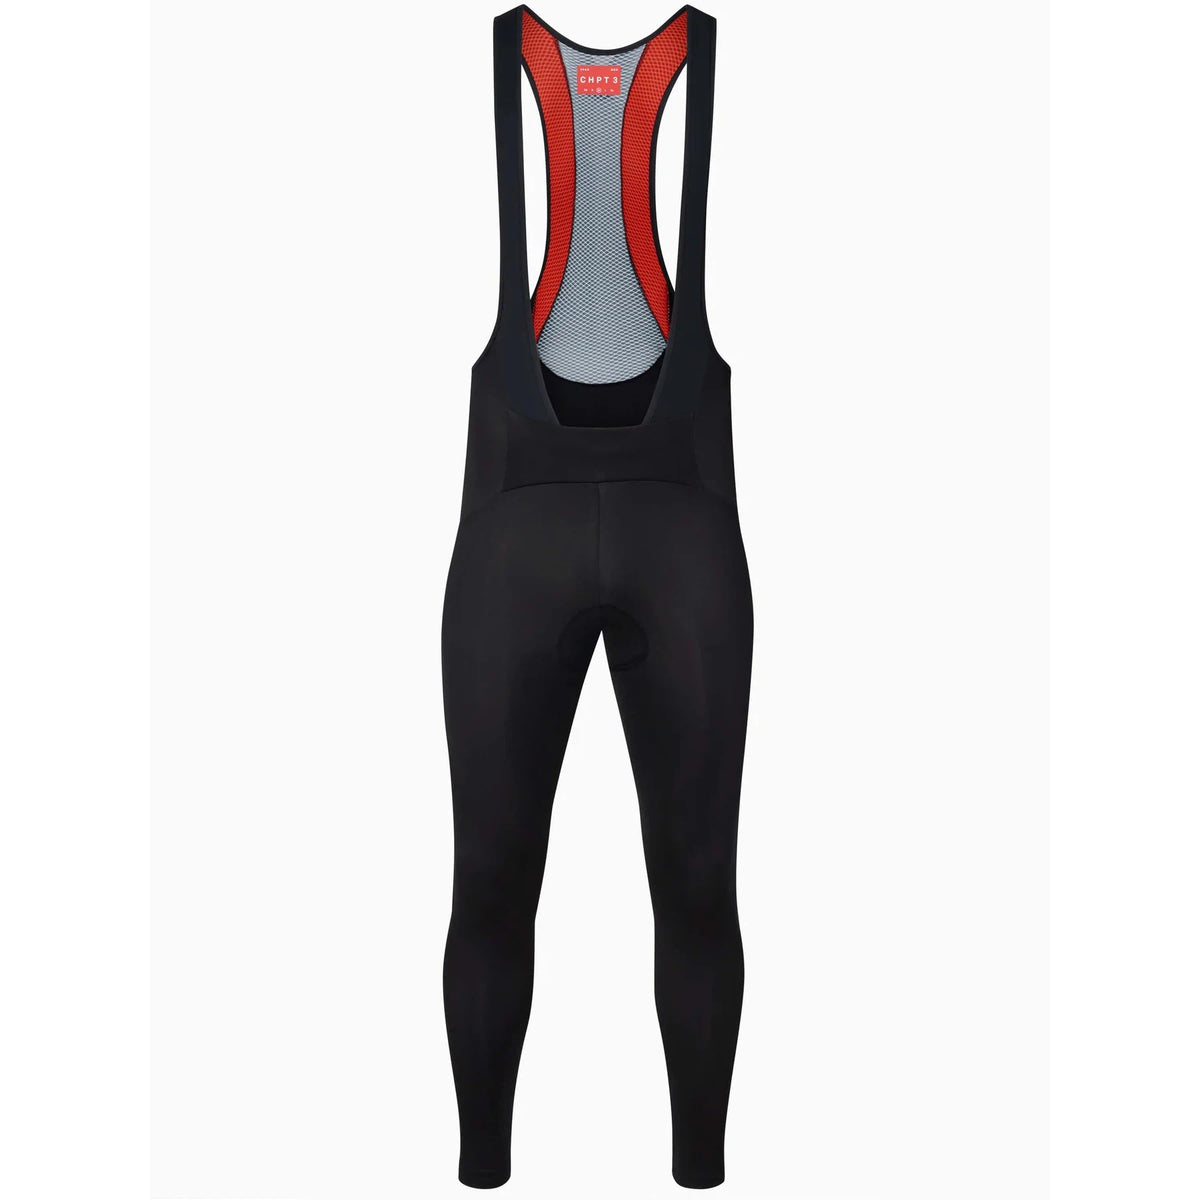 Legging it:  rides out in Rivelo winter bib tights